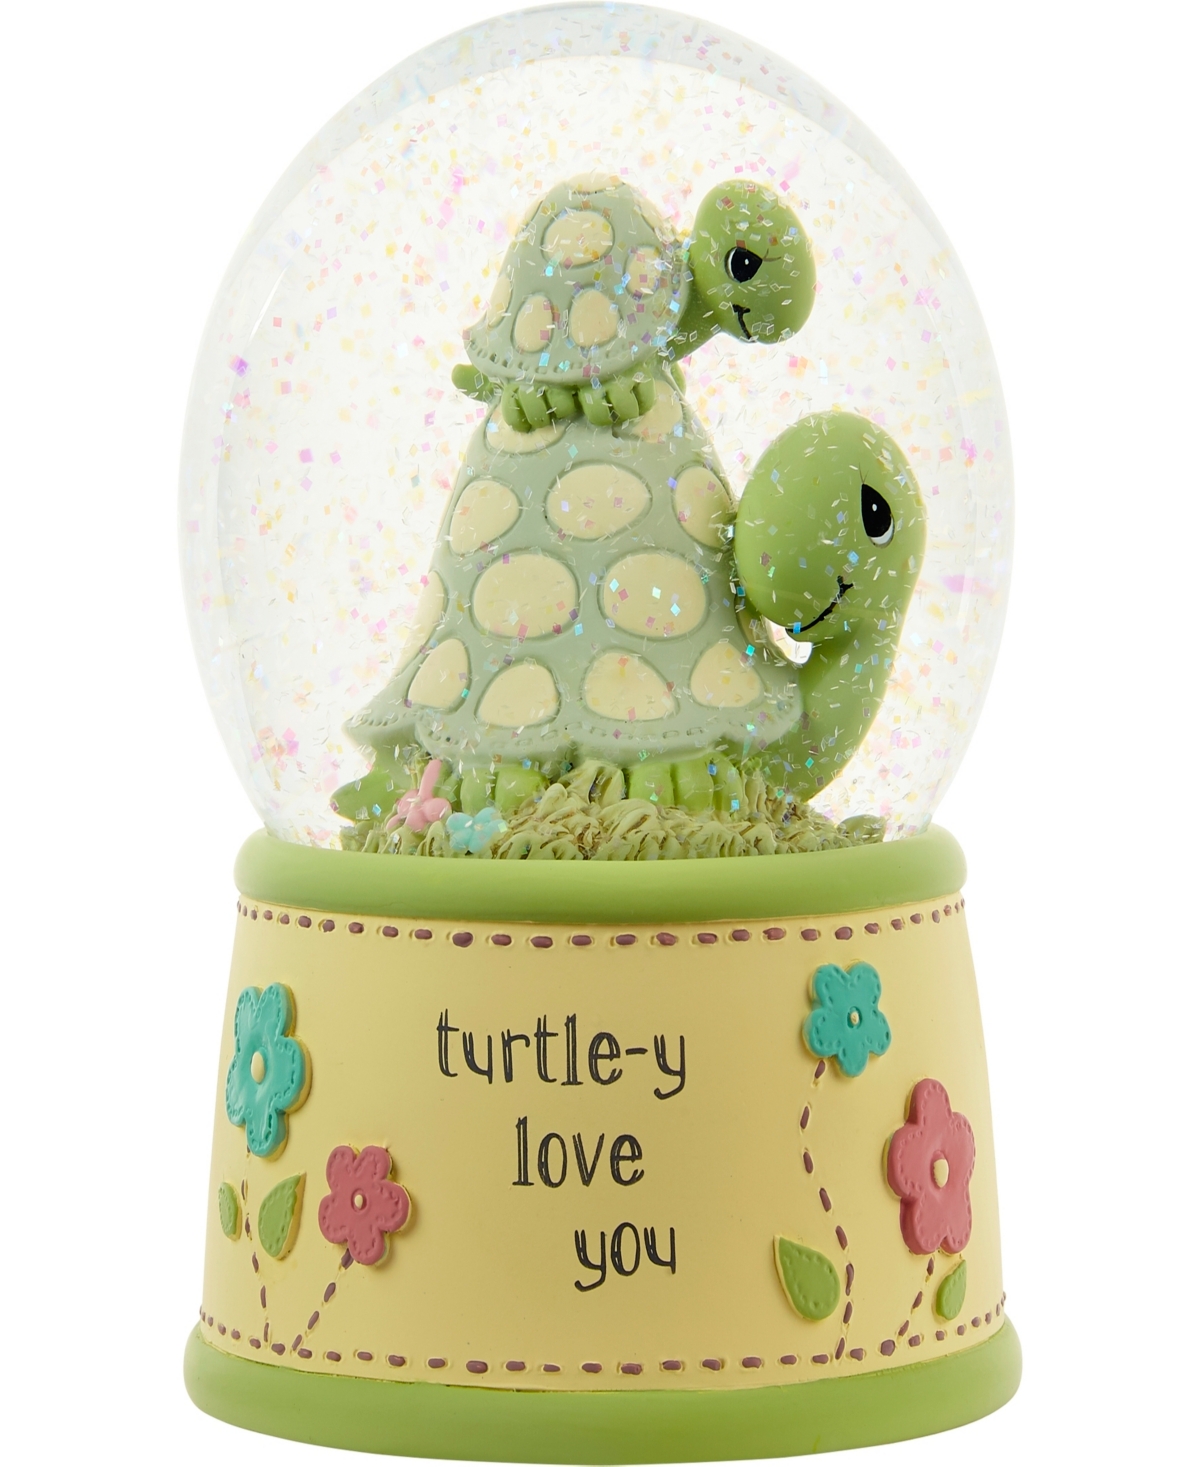 Precious Moments 222102 Turtle-y Love You Resin And Glass Musical Snow Globe In Multicolored